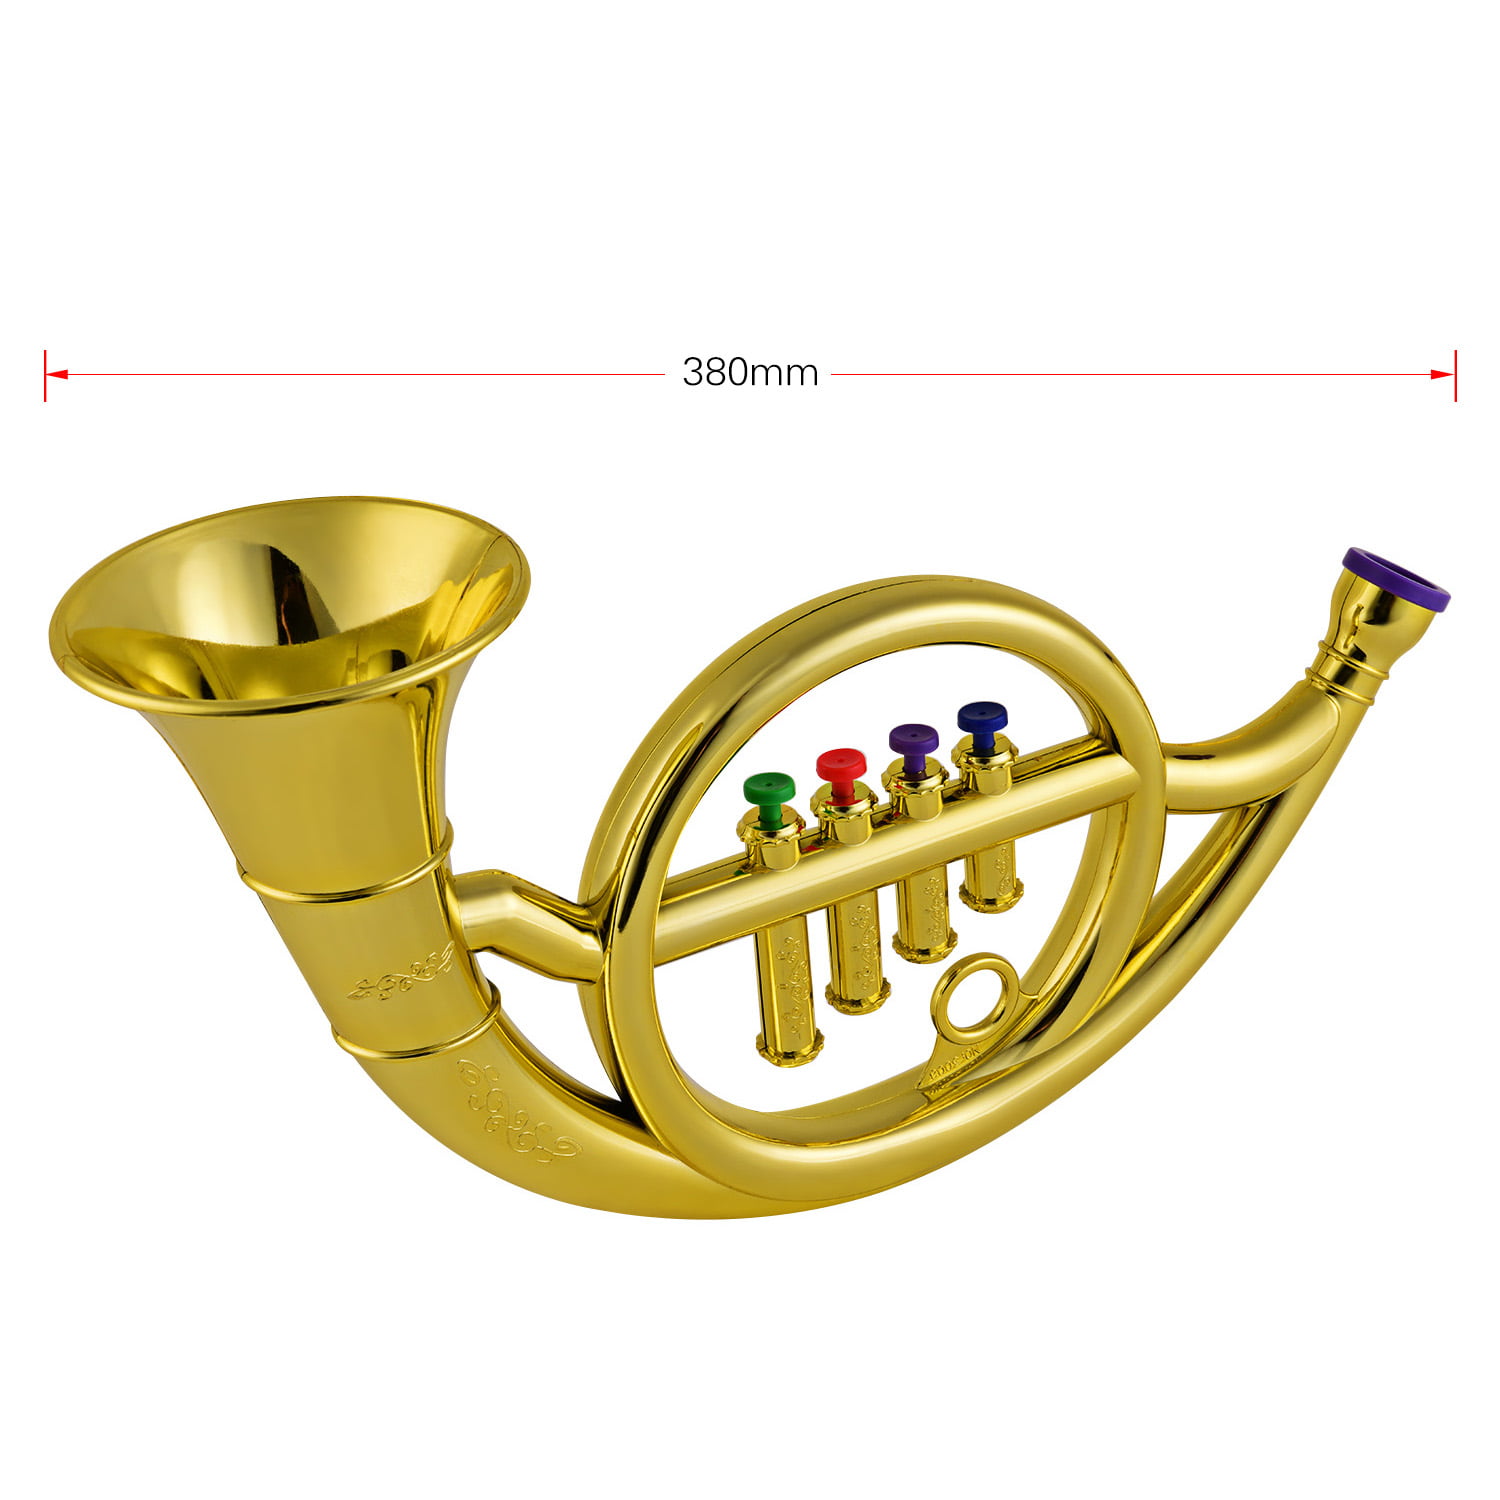 High Quality nstrument Model Miniature French Horn Made of brass for Christmas